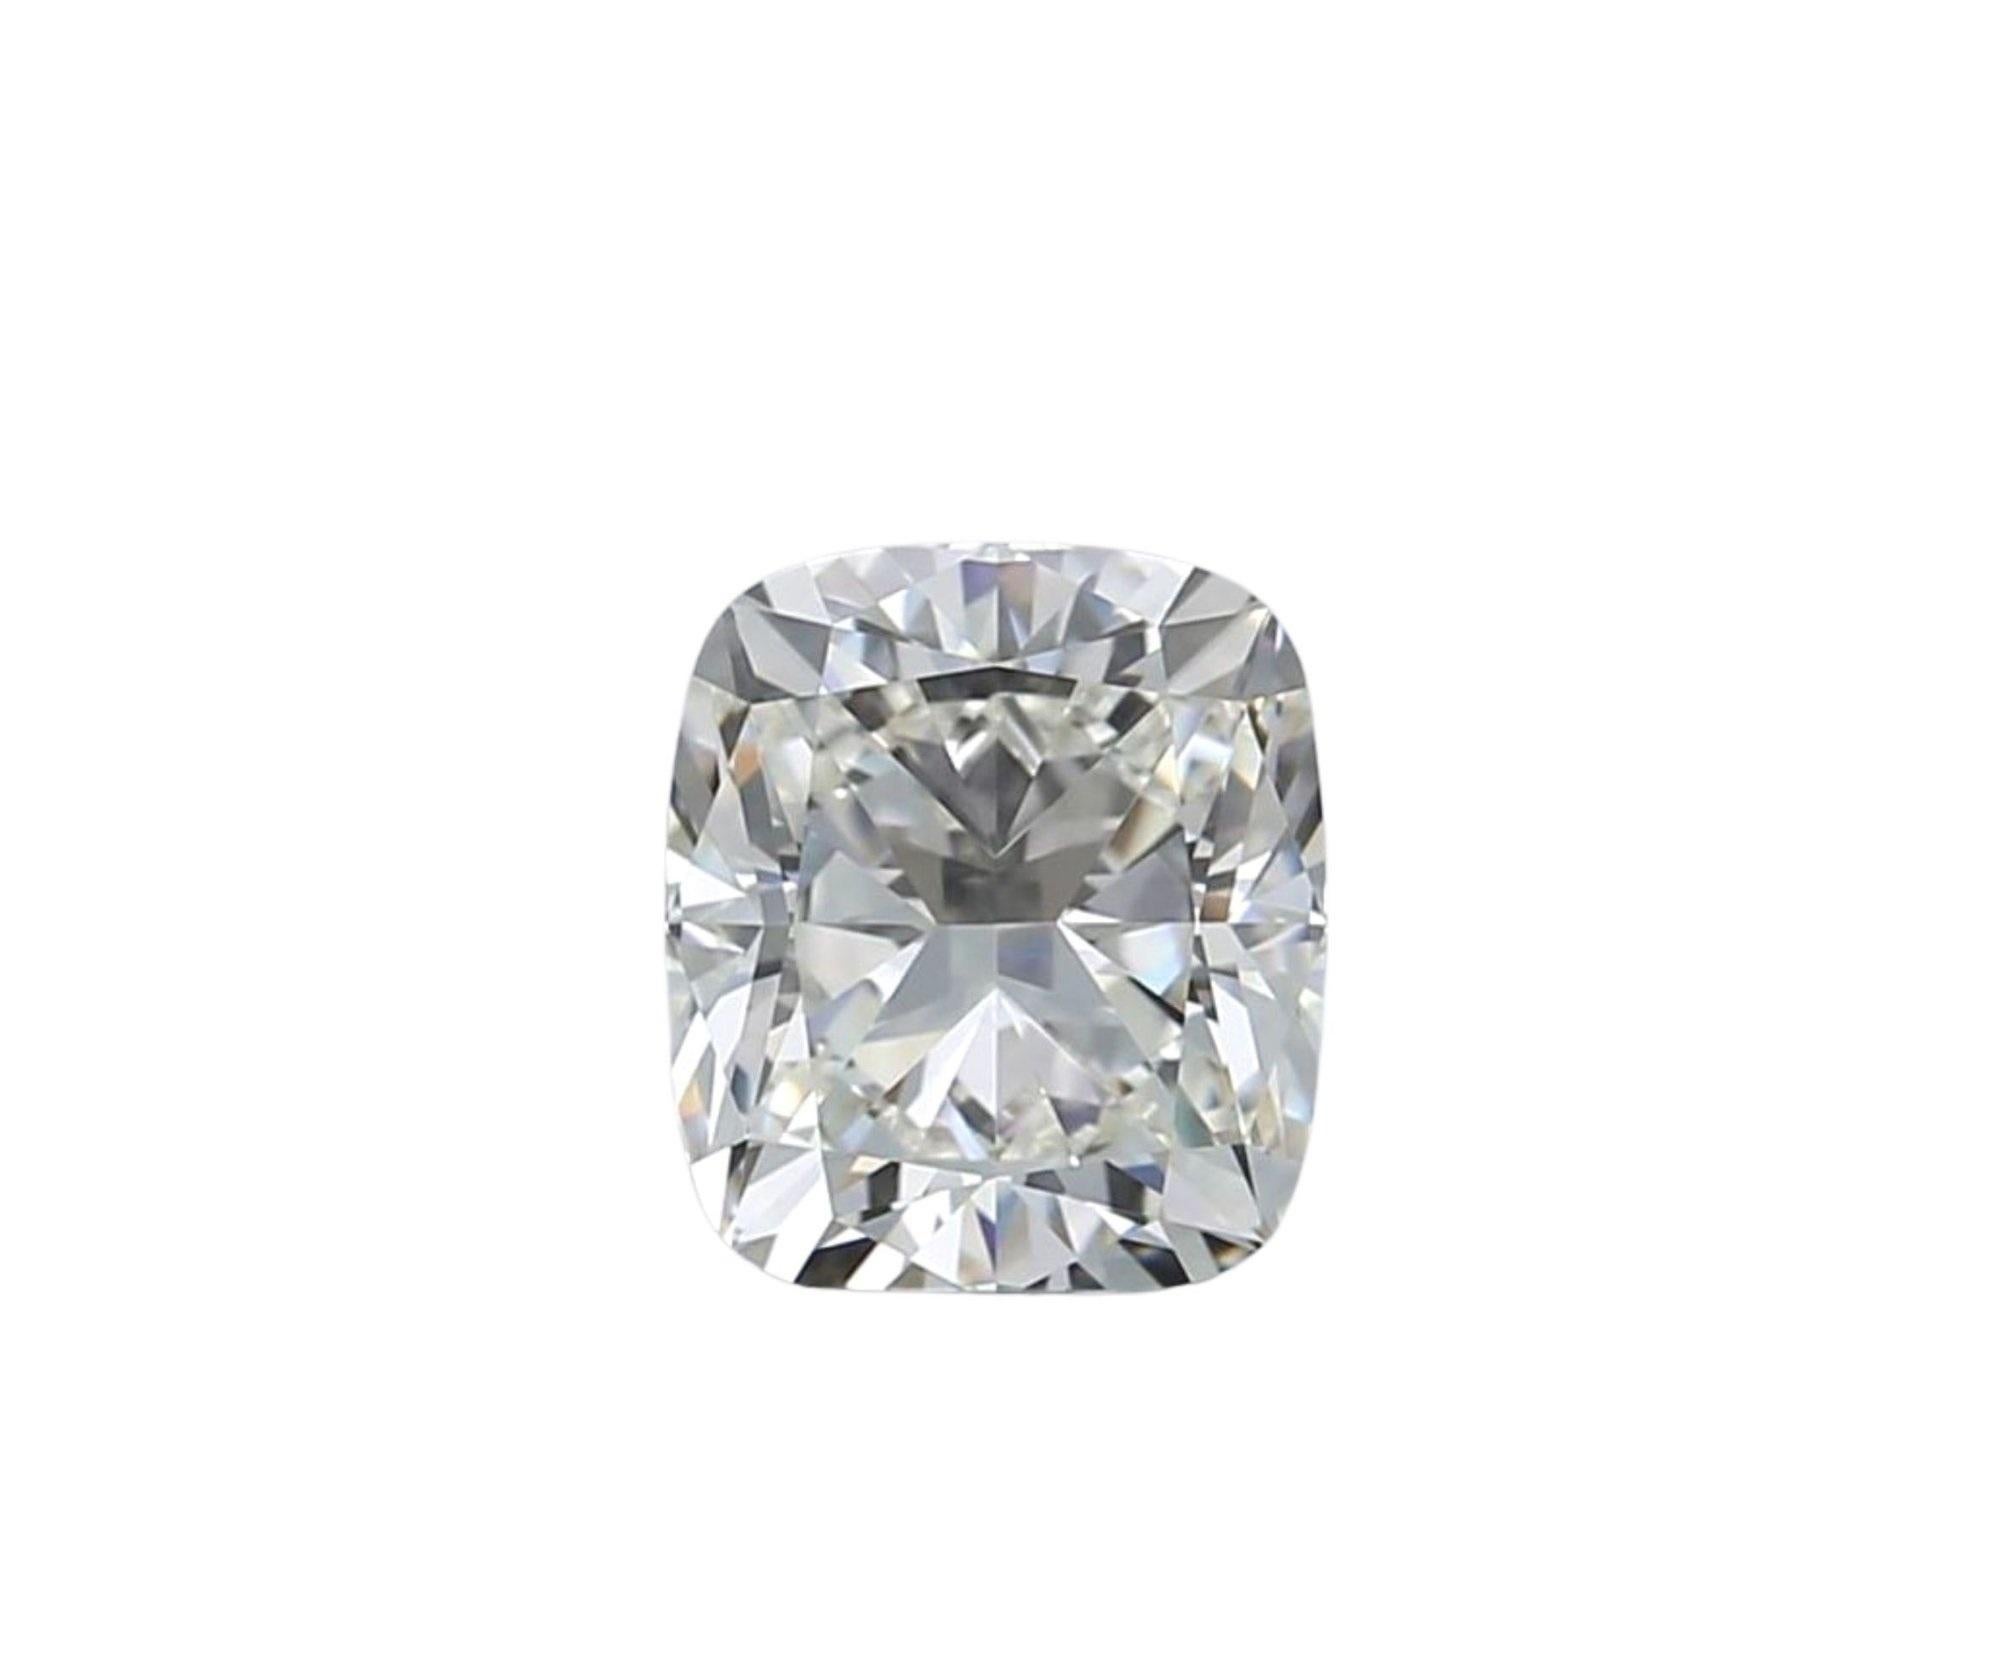 Natural Cushion Diamond in a 1.01 Carat H IF- IGI Certificate For Sale 3